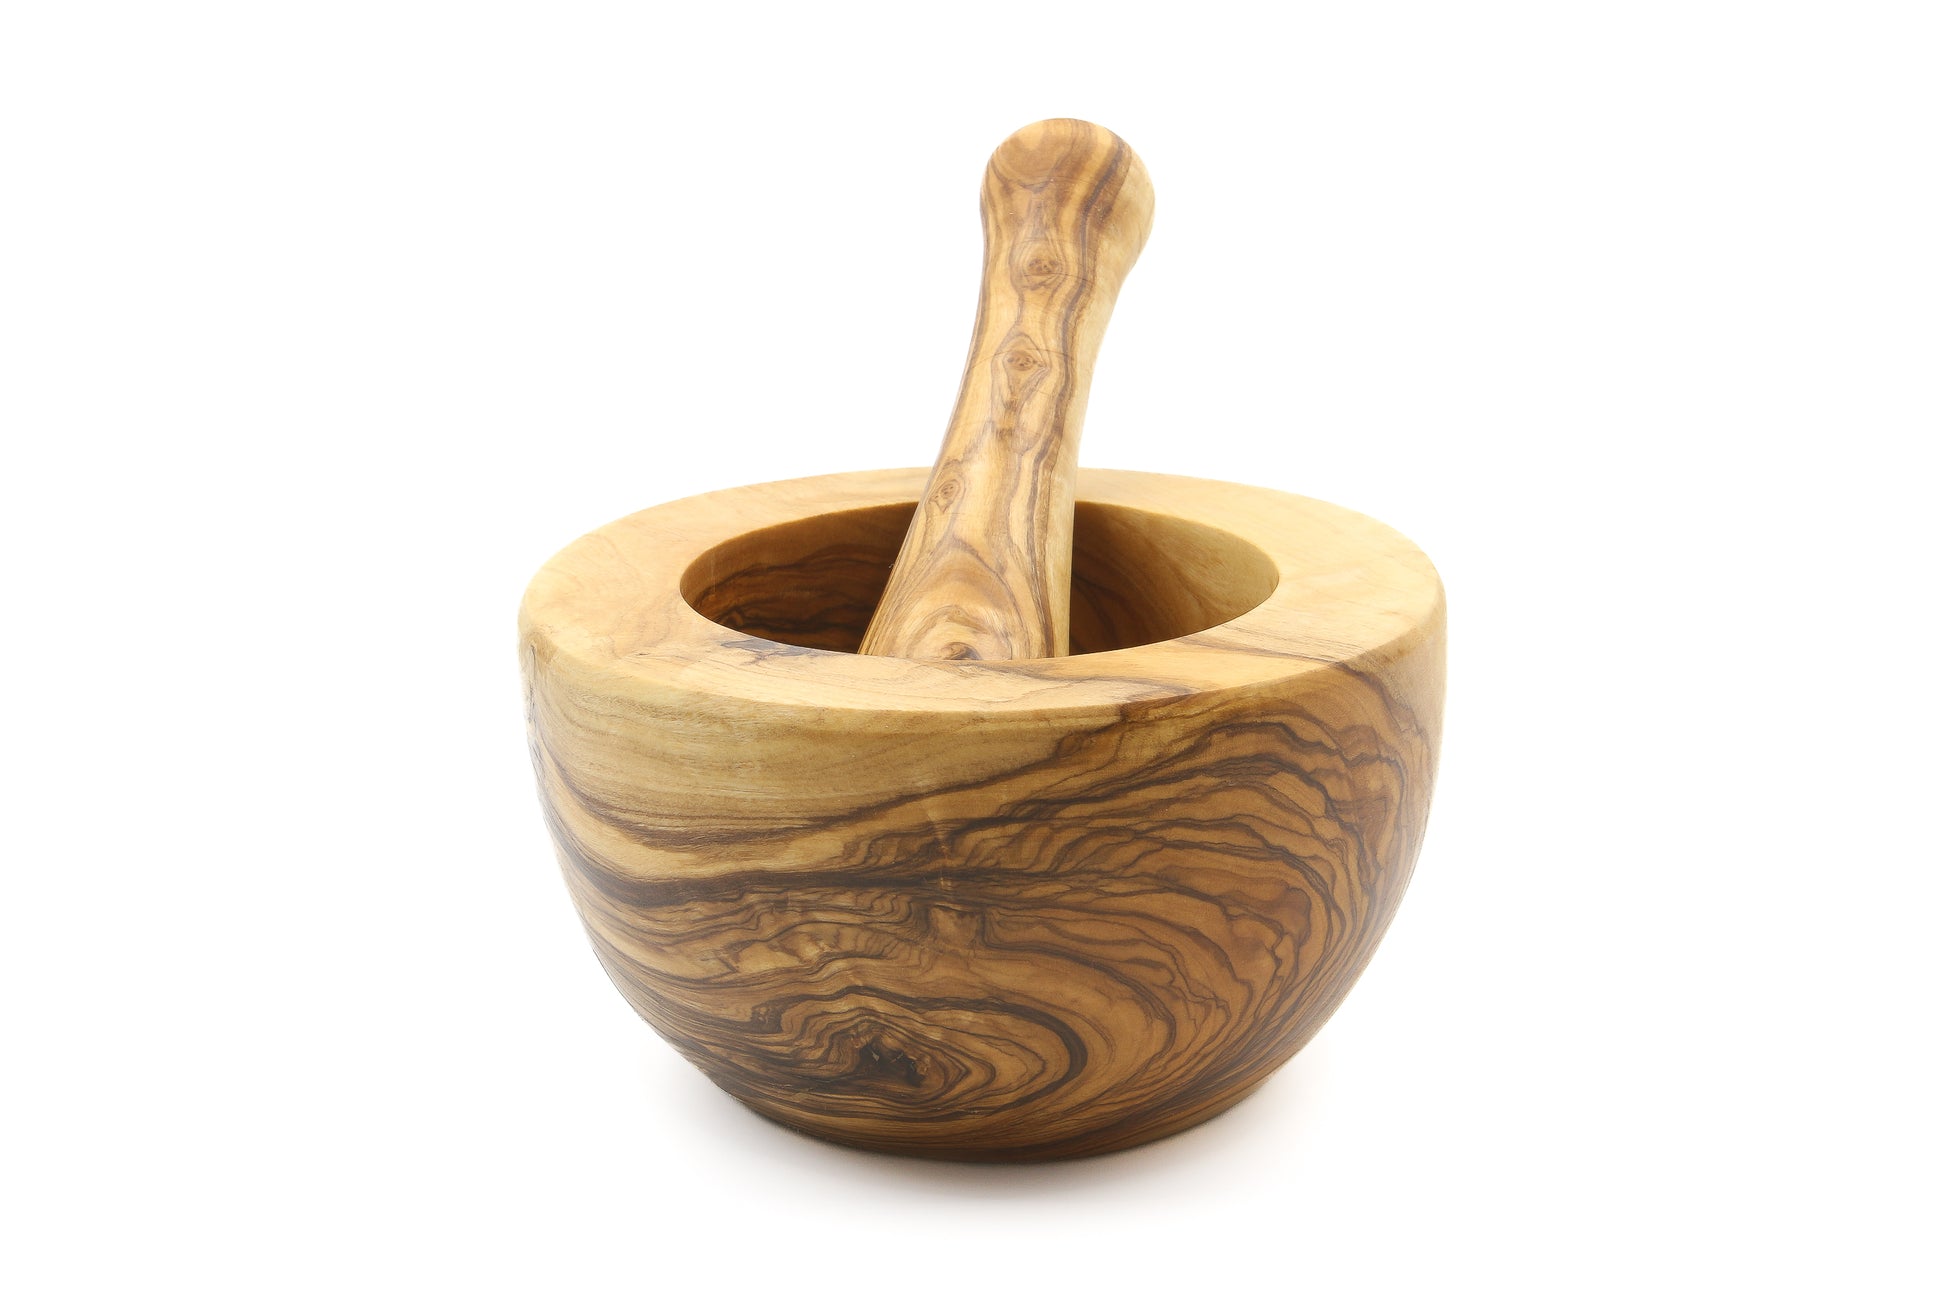 Artisan-crafted olive wood tool for grinding herbs and spices